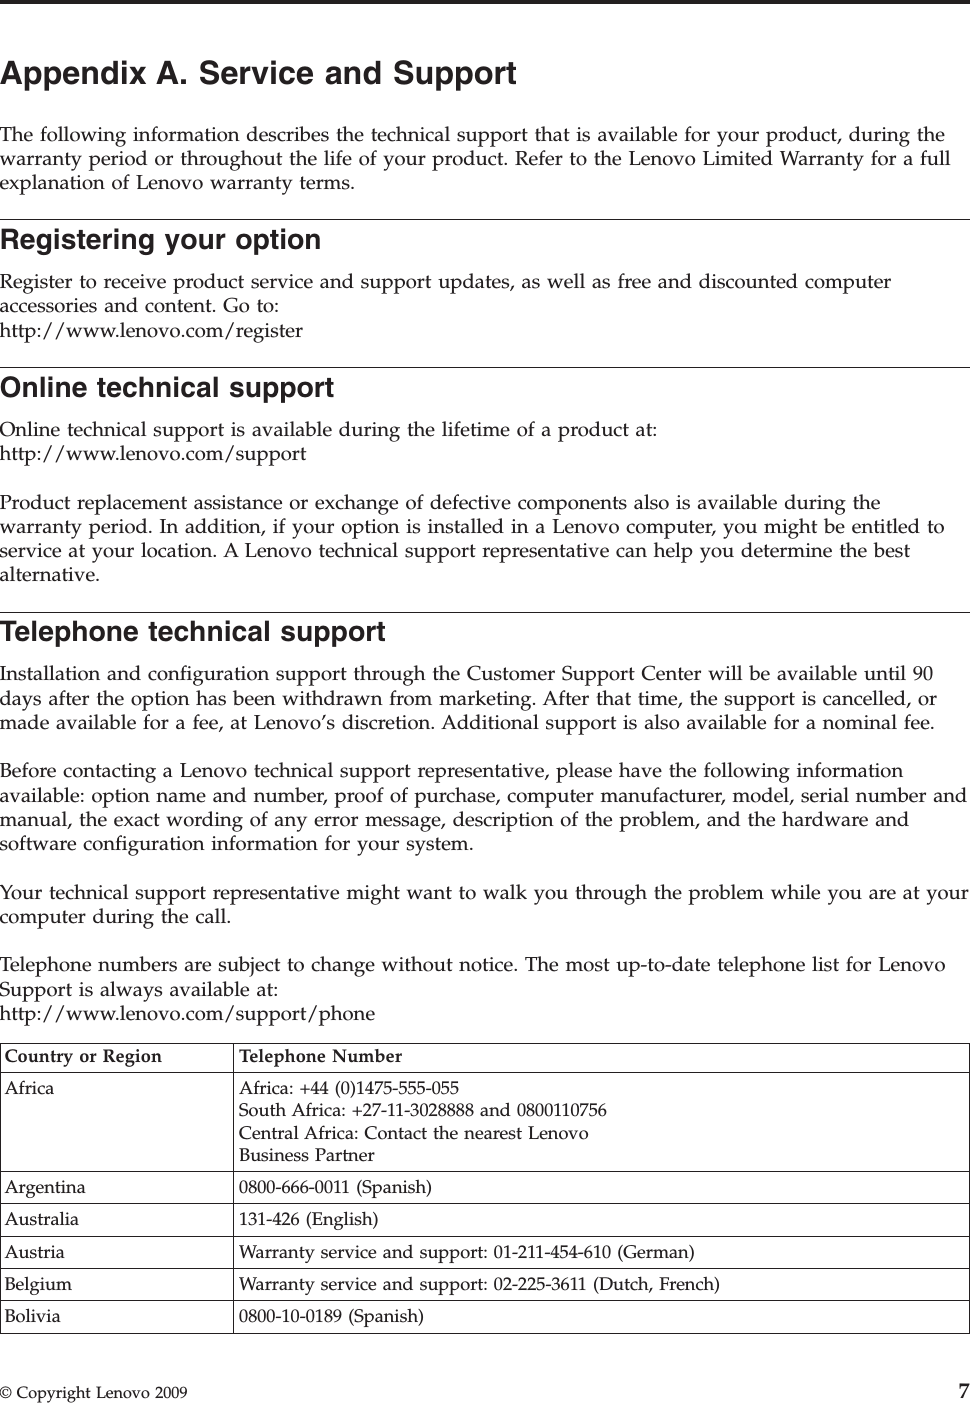 Appendix A. Service and Support The following information describes the technical support that is available for your product, during the warranty period or throughout the life of your product. Refer to the Lenovo Limited Warranty for a full explanation of Lenovo warranty terms. Registering your option Register to receive product service and support updates, as well as free and discounted computer accessories and content. Go to:http://www.lenovo.com/register Online technical support Online technical support is available during the lifetime of a product at: http://www.lenovo.com/support Product replacement assistance or exchange of defective components also is available during the warranty period. In addition, if your option is installed in a Lenovo computer, you might be entitled to service at your location. A Lenovo technical support representative can help you determine the best alternative. Telephone technical support Installation and configuration support through the Customer Support Center will be available until 90 days after the option has been withdrawn from marketing. After that time, the support is cancelled, or made available for a fee, at Lenovo’s discretion. Additional support is also available for a nominal fee. Before contacting a Lenovo technical support representative, please have the following information available: option name and number, proof of purchase, computer manufacturer, model, serial number and manual, the exact wording of any error message, description of the problem, and the hardware and software configuration information for your system. Your technical support representative might want to walk you through the problem while you are at your computer during the call. Telephone numbers are subject to change without notice. The most up-to-date telephone list for Lenovo Support is always available at: http://www.lenovo.com/support/phone  Country or Region Telephone Number Africa Africa: +44 (0)1475-555-055 South Africa: +27-11-3028888 and 0800110756 Central Africa: Contact the nearest Lenovo Business Partner Argentina 0800-666-0011 (Spanish) Australia 131-426 (English) Austria Warranty service and support: 01-211-454-610 (German) Belgium Warranty service and support: 02-225-3611 (Dutch, French) Bolivia 0800-10-0189 (Spanish)  © Copyright Lenovo 2009 7